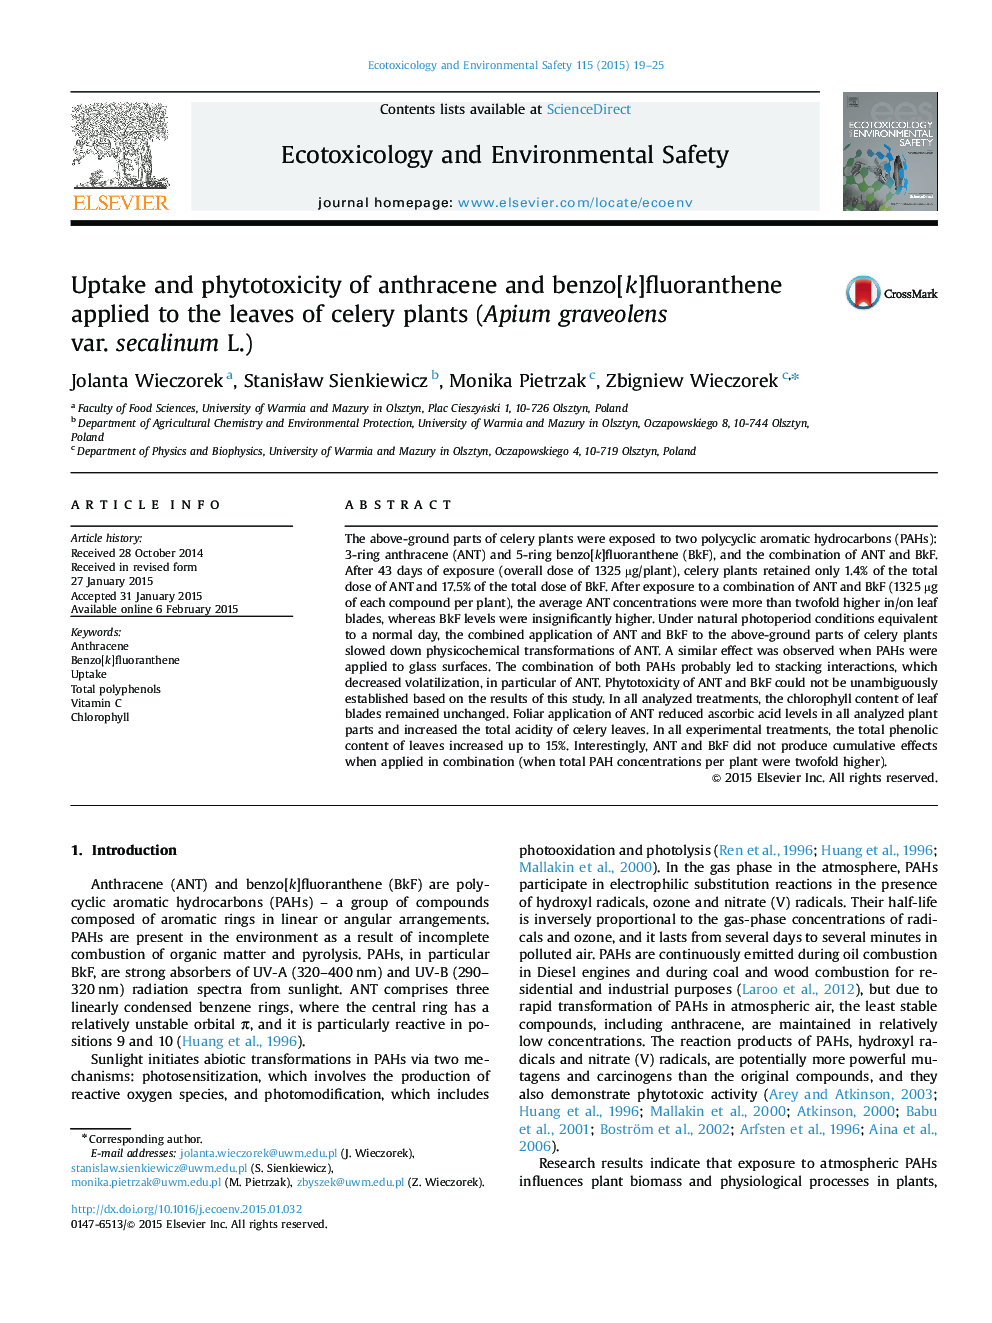 Uptake and phytotoxicity of anthracene and benzo[k]fluoranthene applied to the leaves of celery plants (Apium graveolens var. secalinum L.)